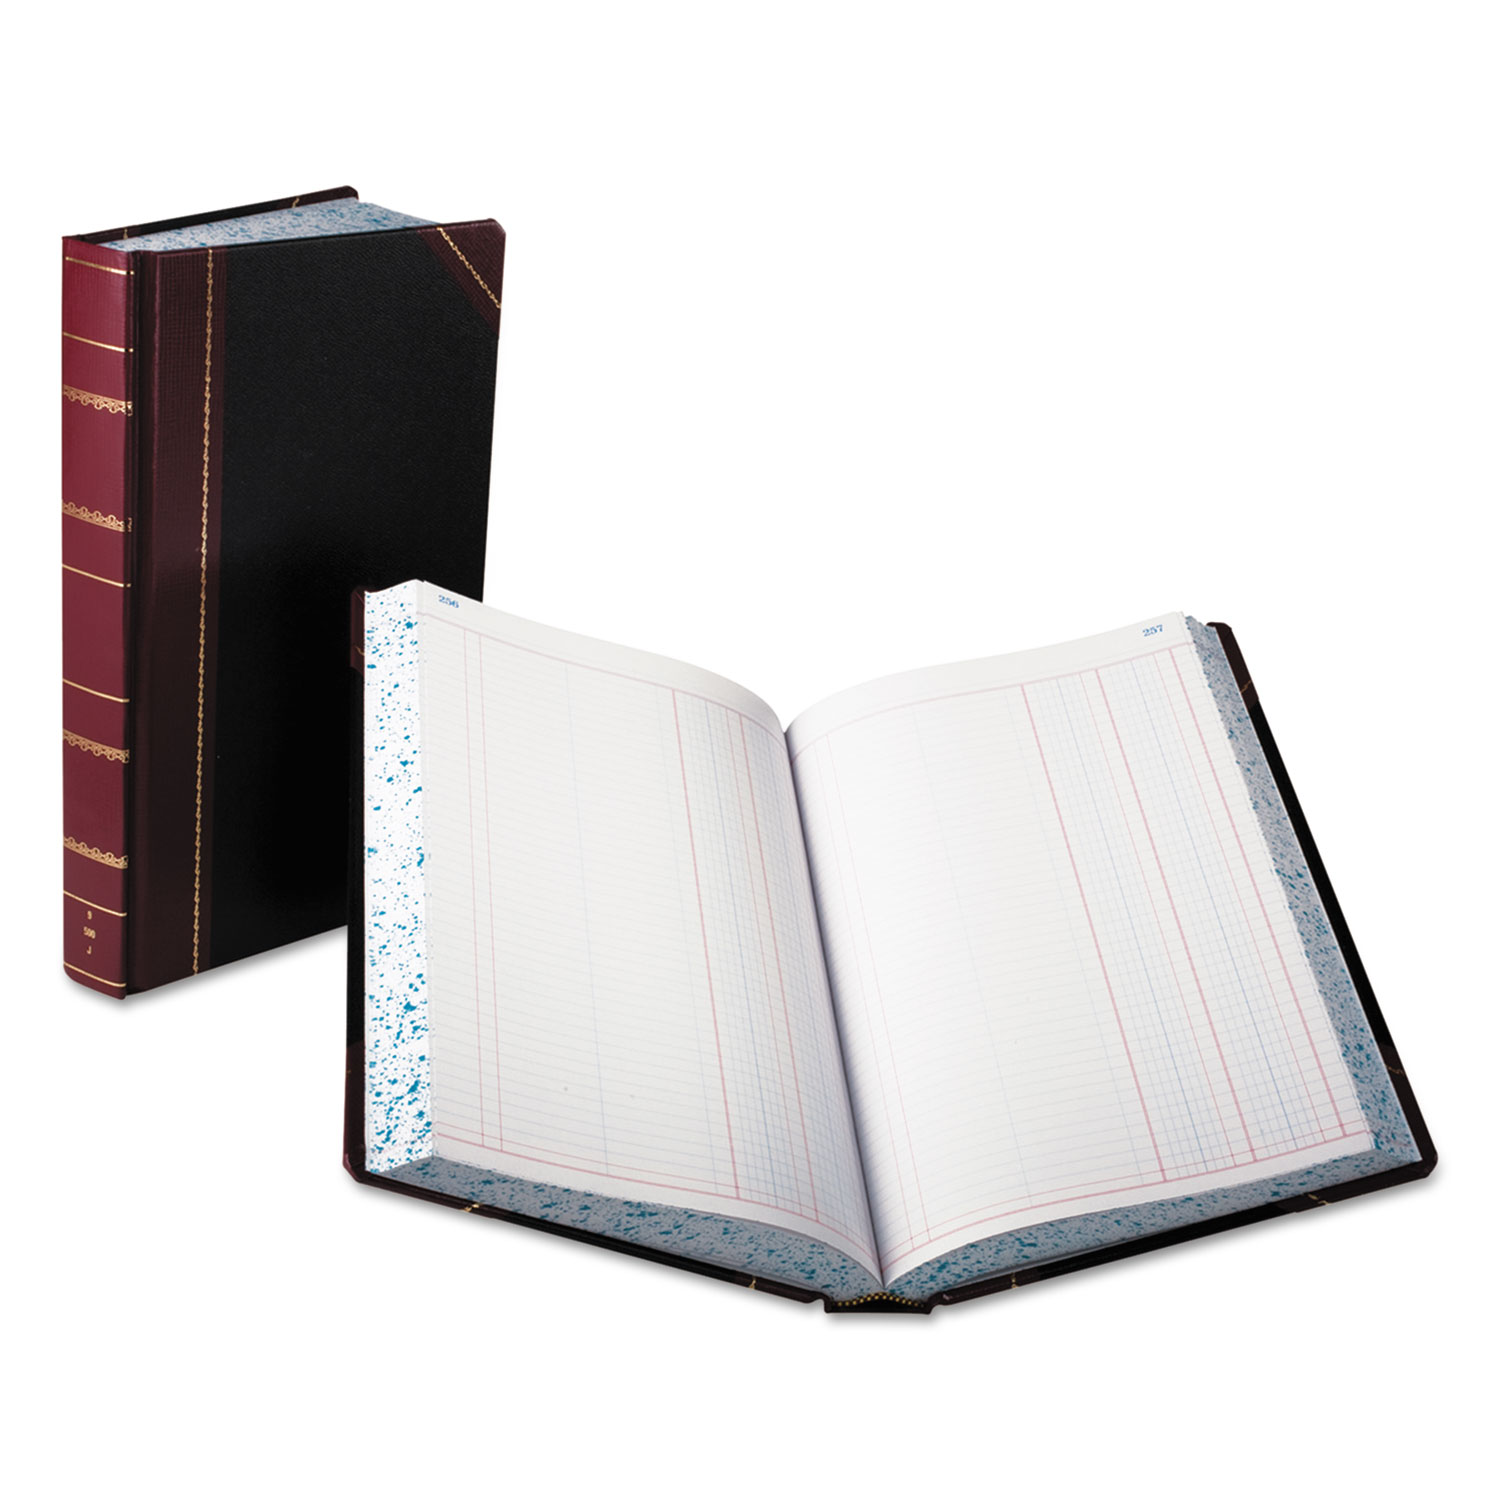  Boorum & Pease 9-500-J Record/Account Book, Journal Rule, Black/Red, 500 Pages, 14 1/8 x 8 5/8 (BOR9500J) 